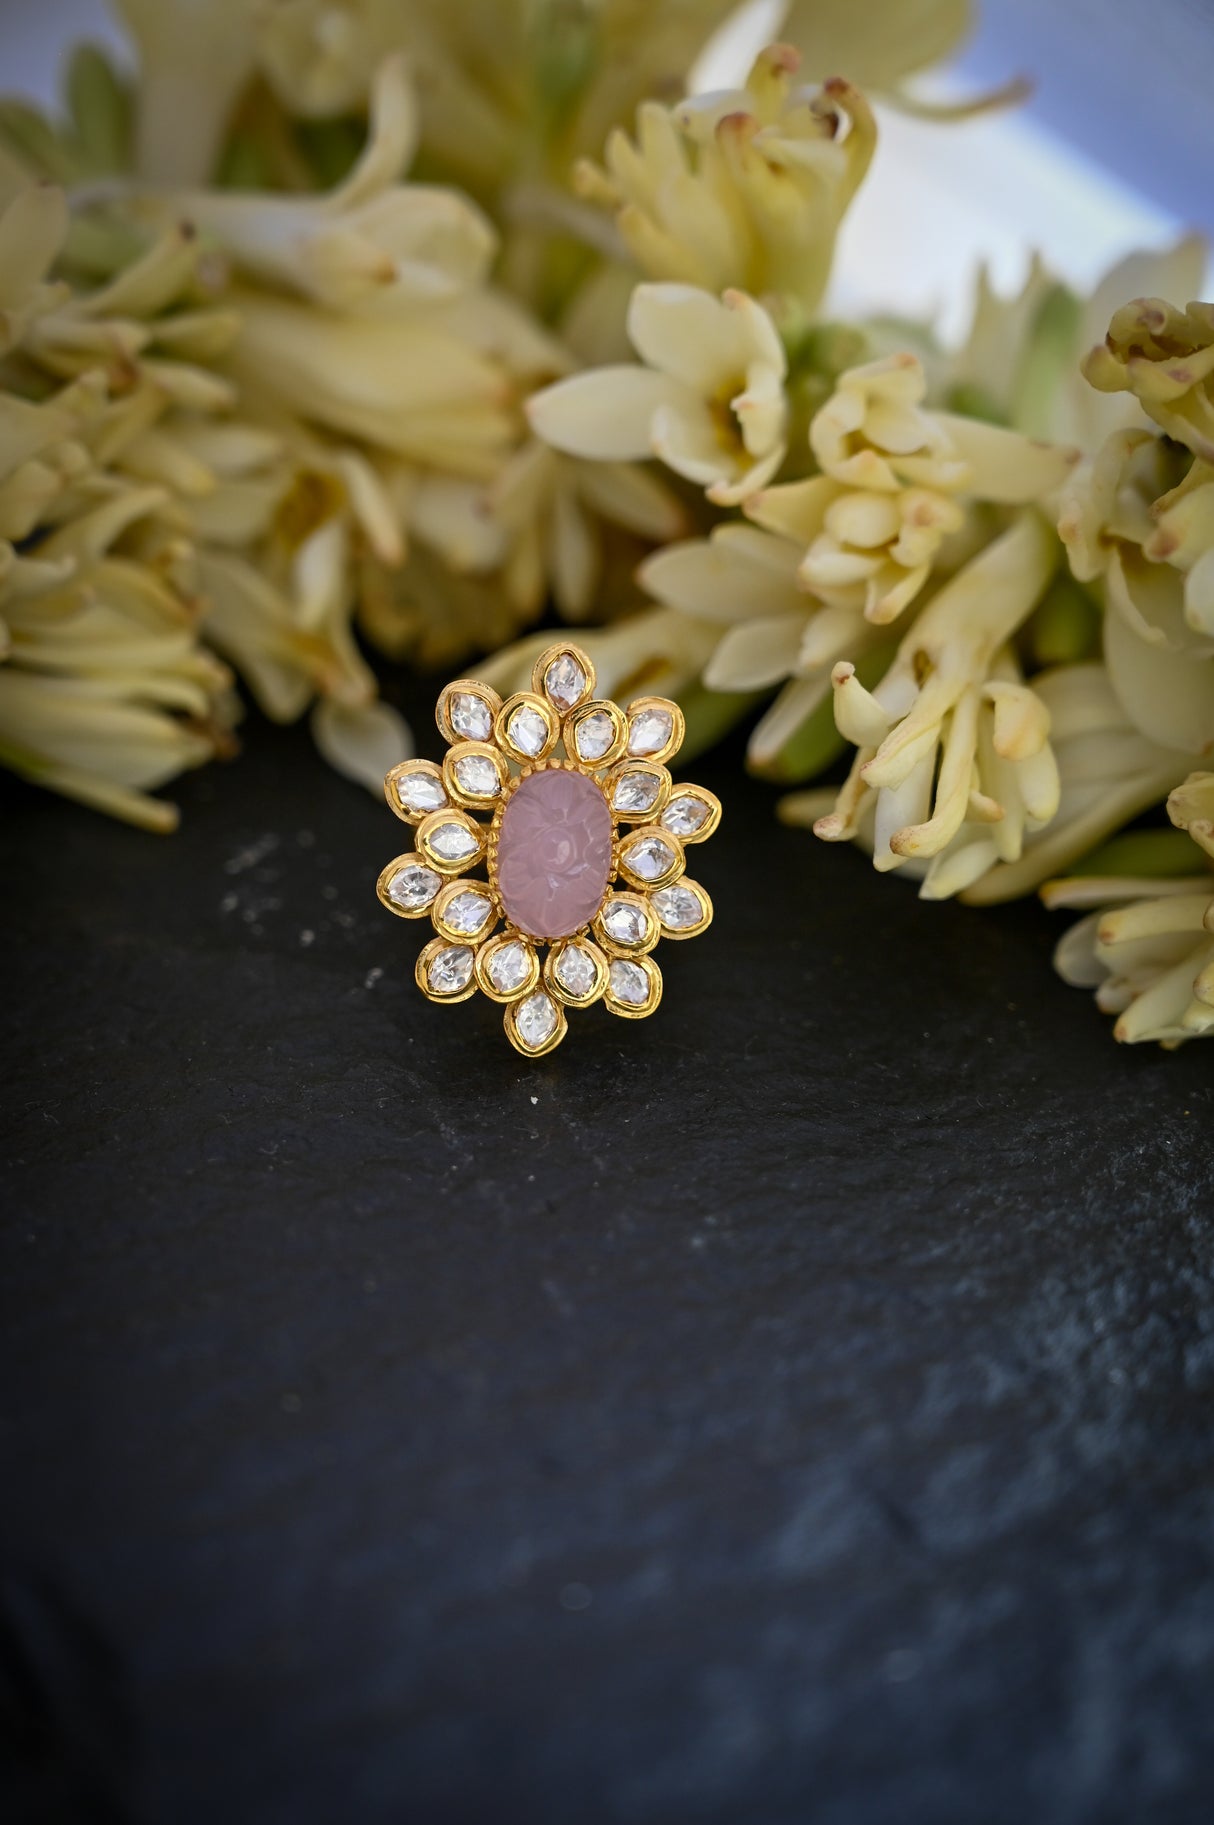 Handcrafted Adjustable 92.5 Silver Ring with Moissanite polki and Carved Pink Strawberry Bead